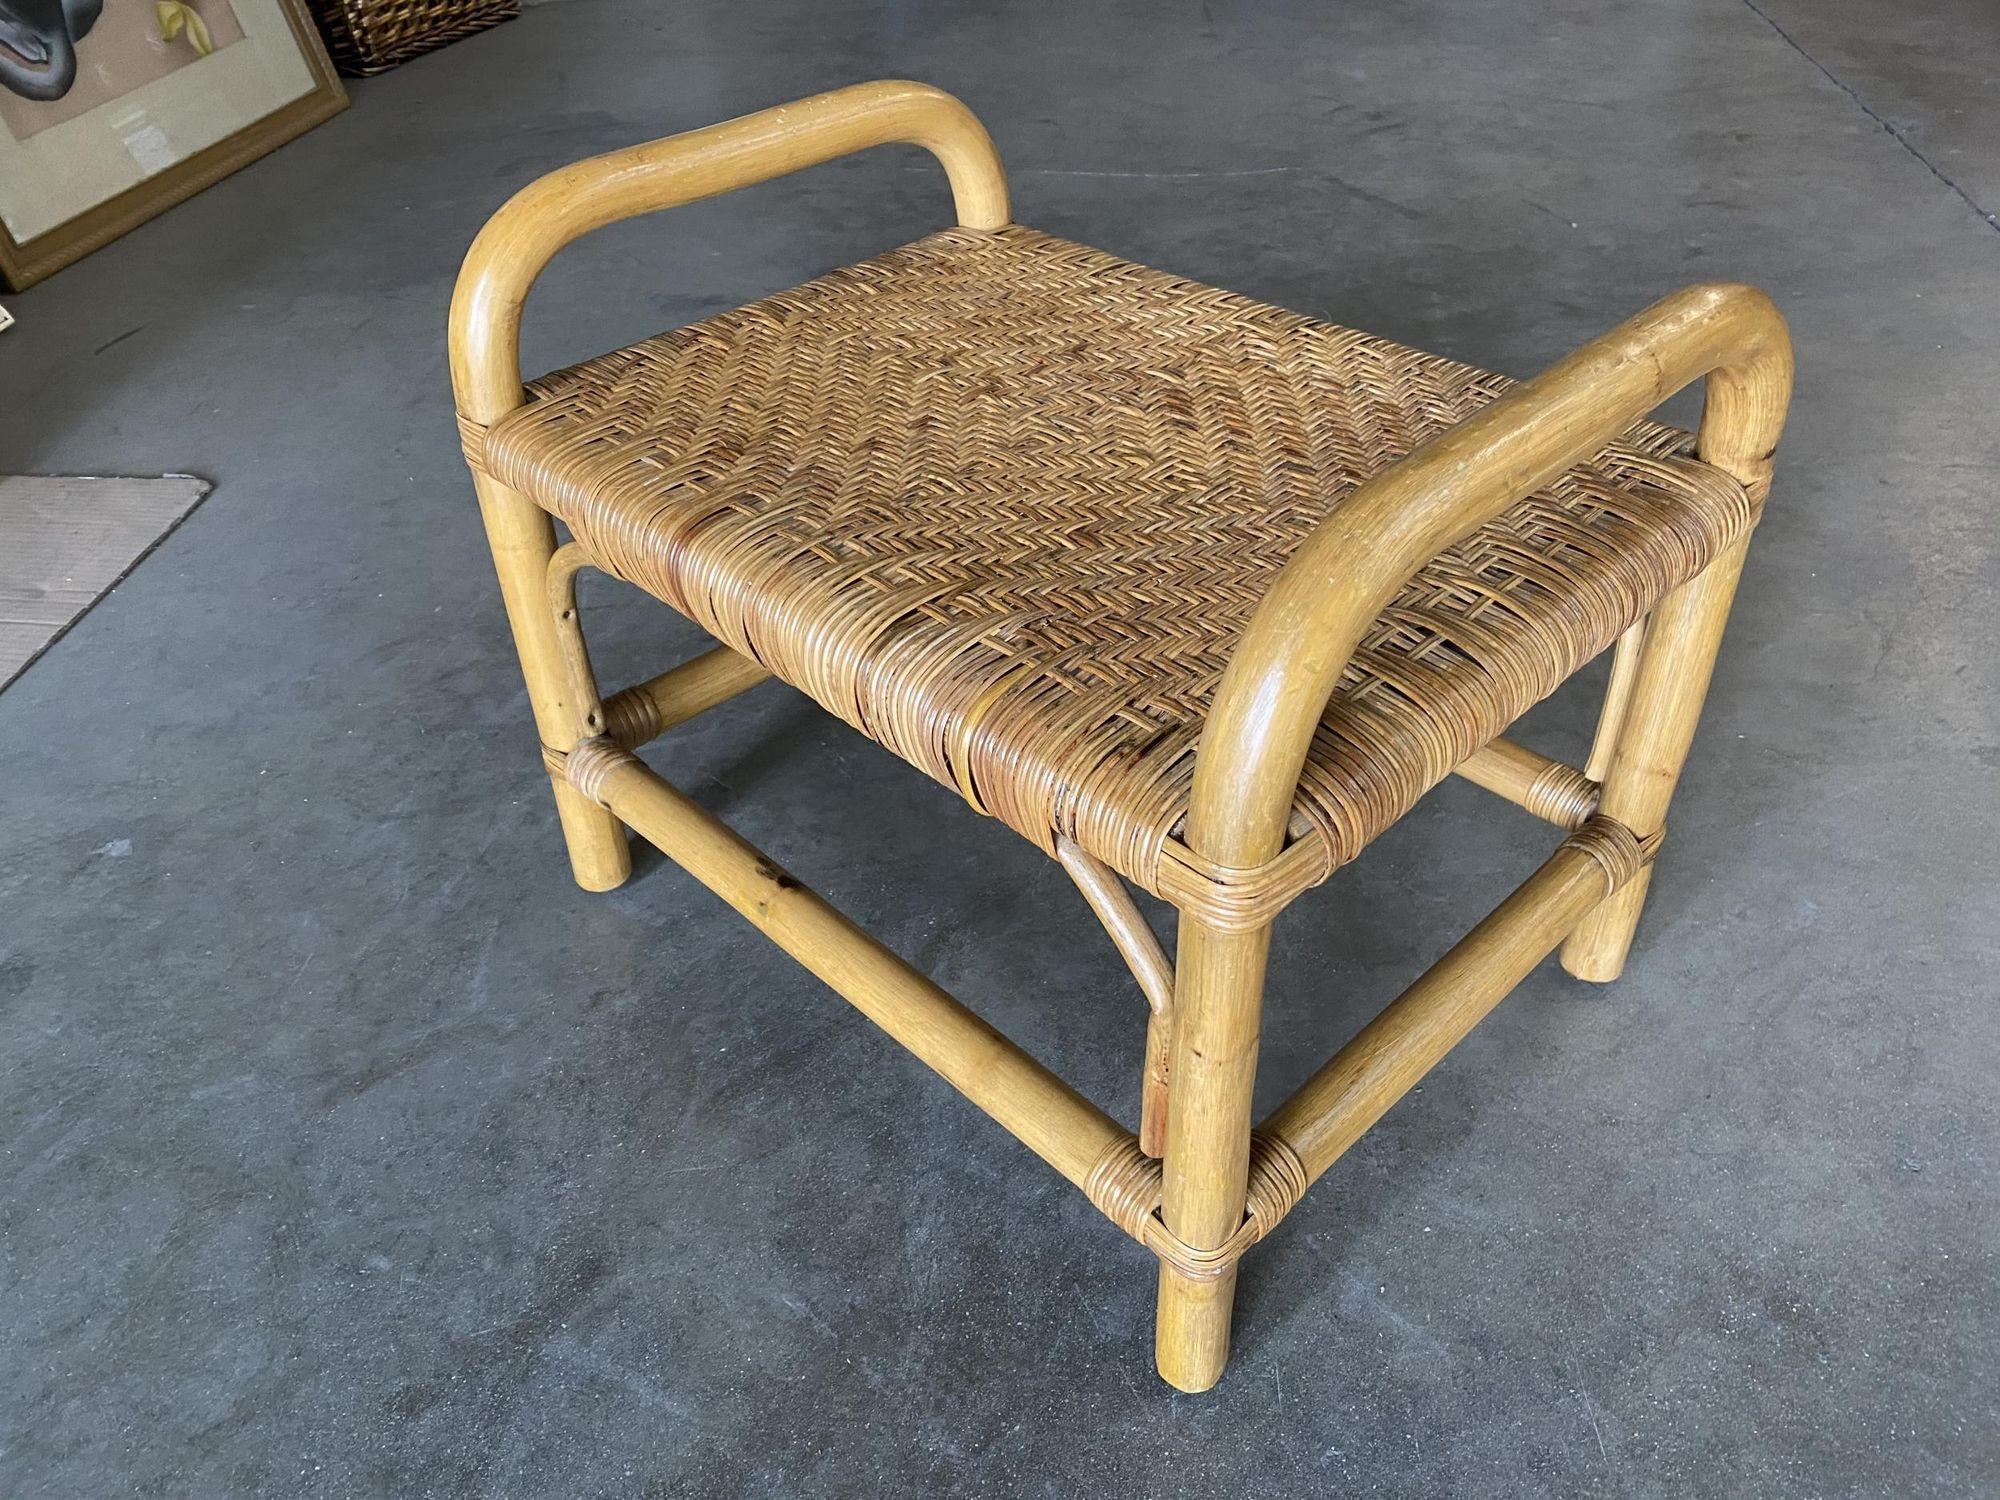 Restored 1950s rattan vanity stool with wicker seat featuring a 